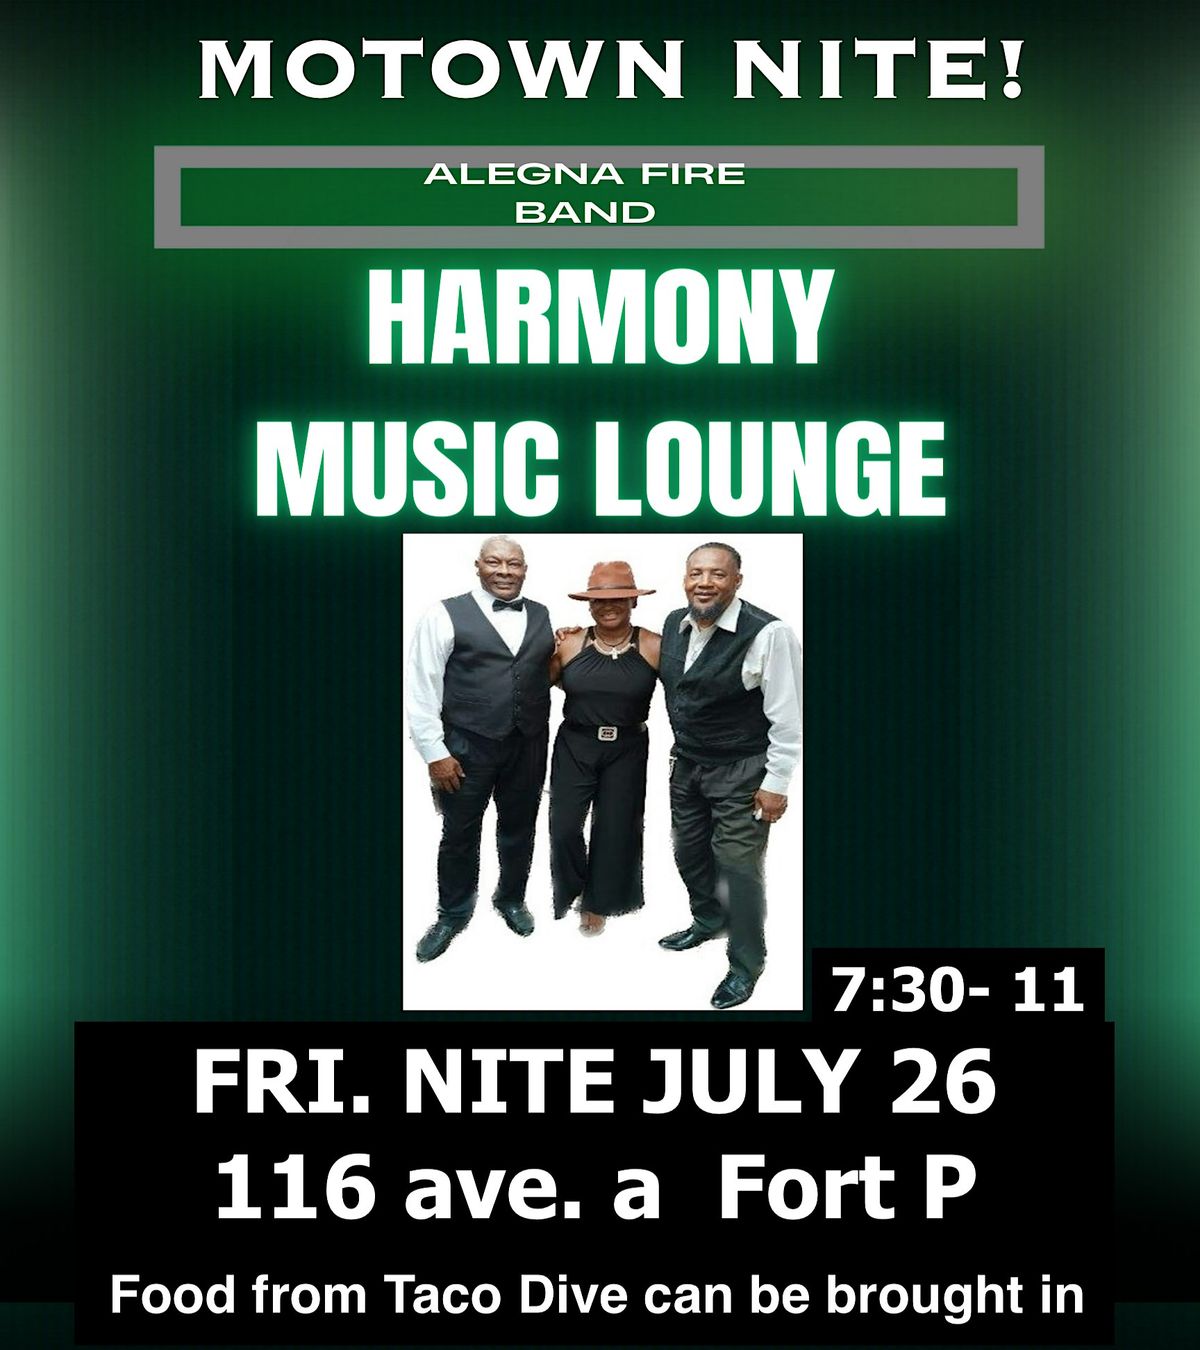 MOTOWN NIGHT - The Hits You Love! Dinner & A Show Downtown Fort Pierce